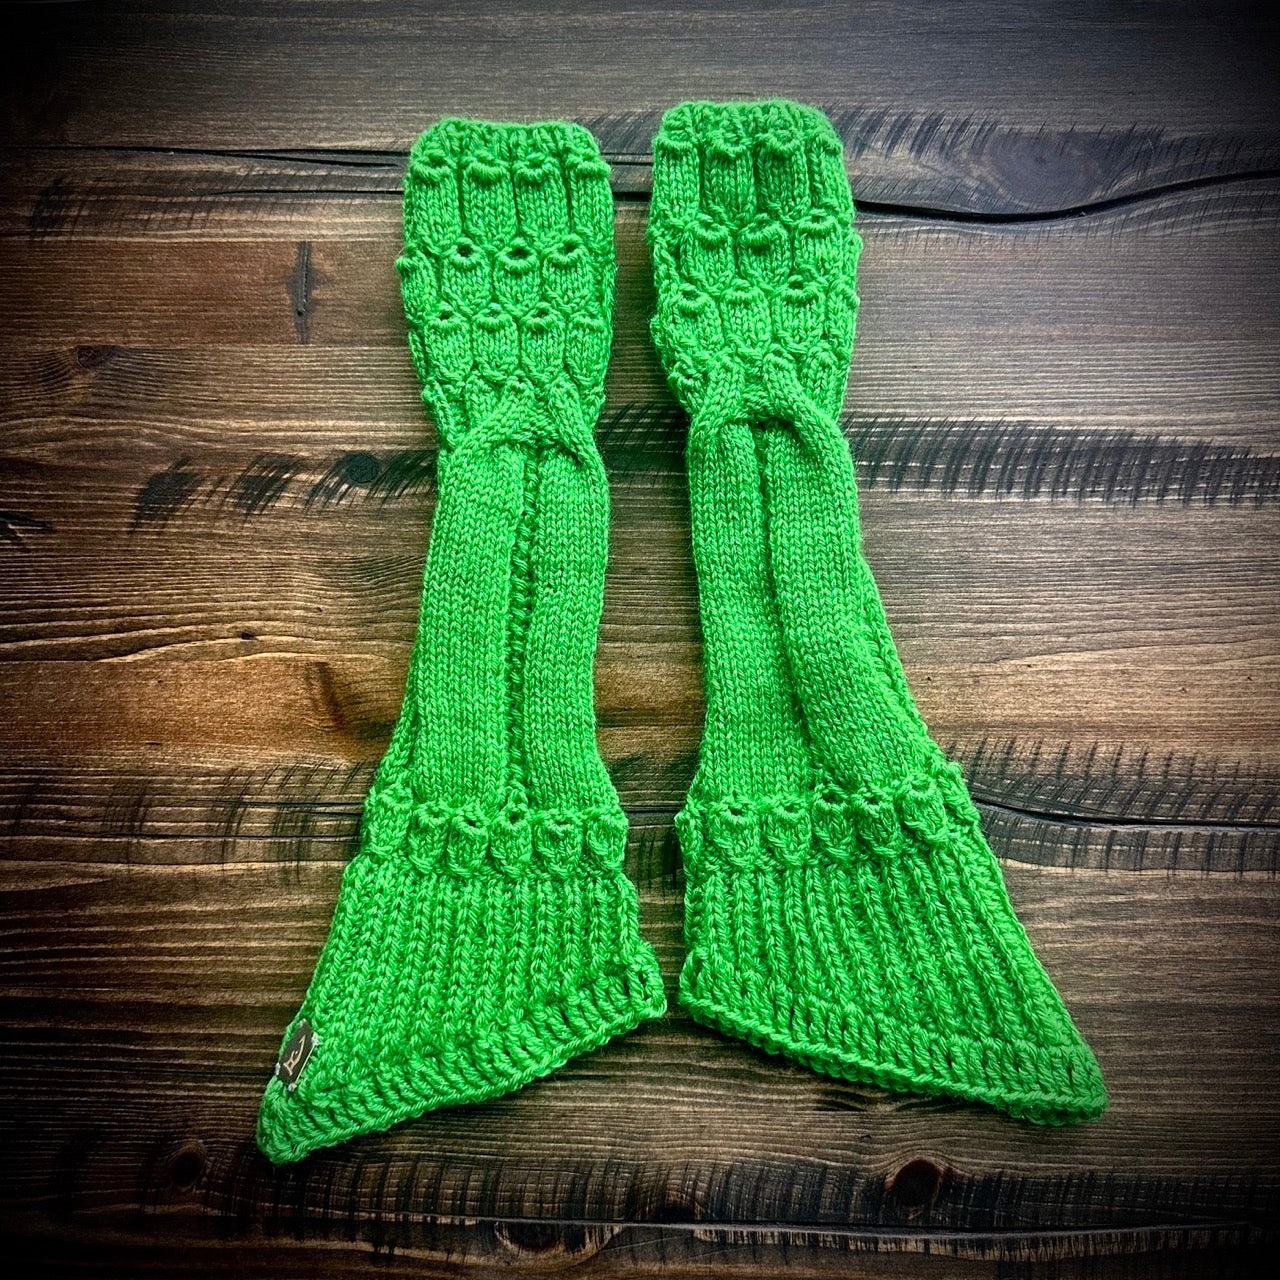 Handmade knitted sparkling emerald arm warmers